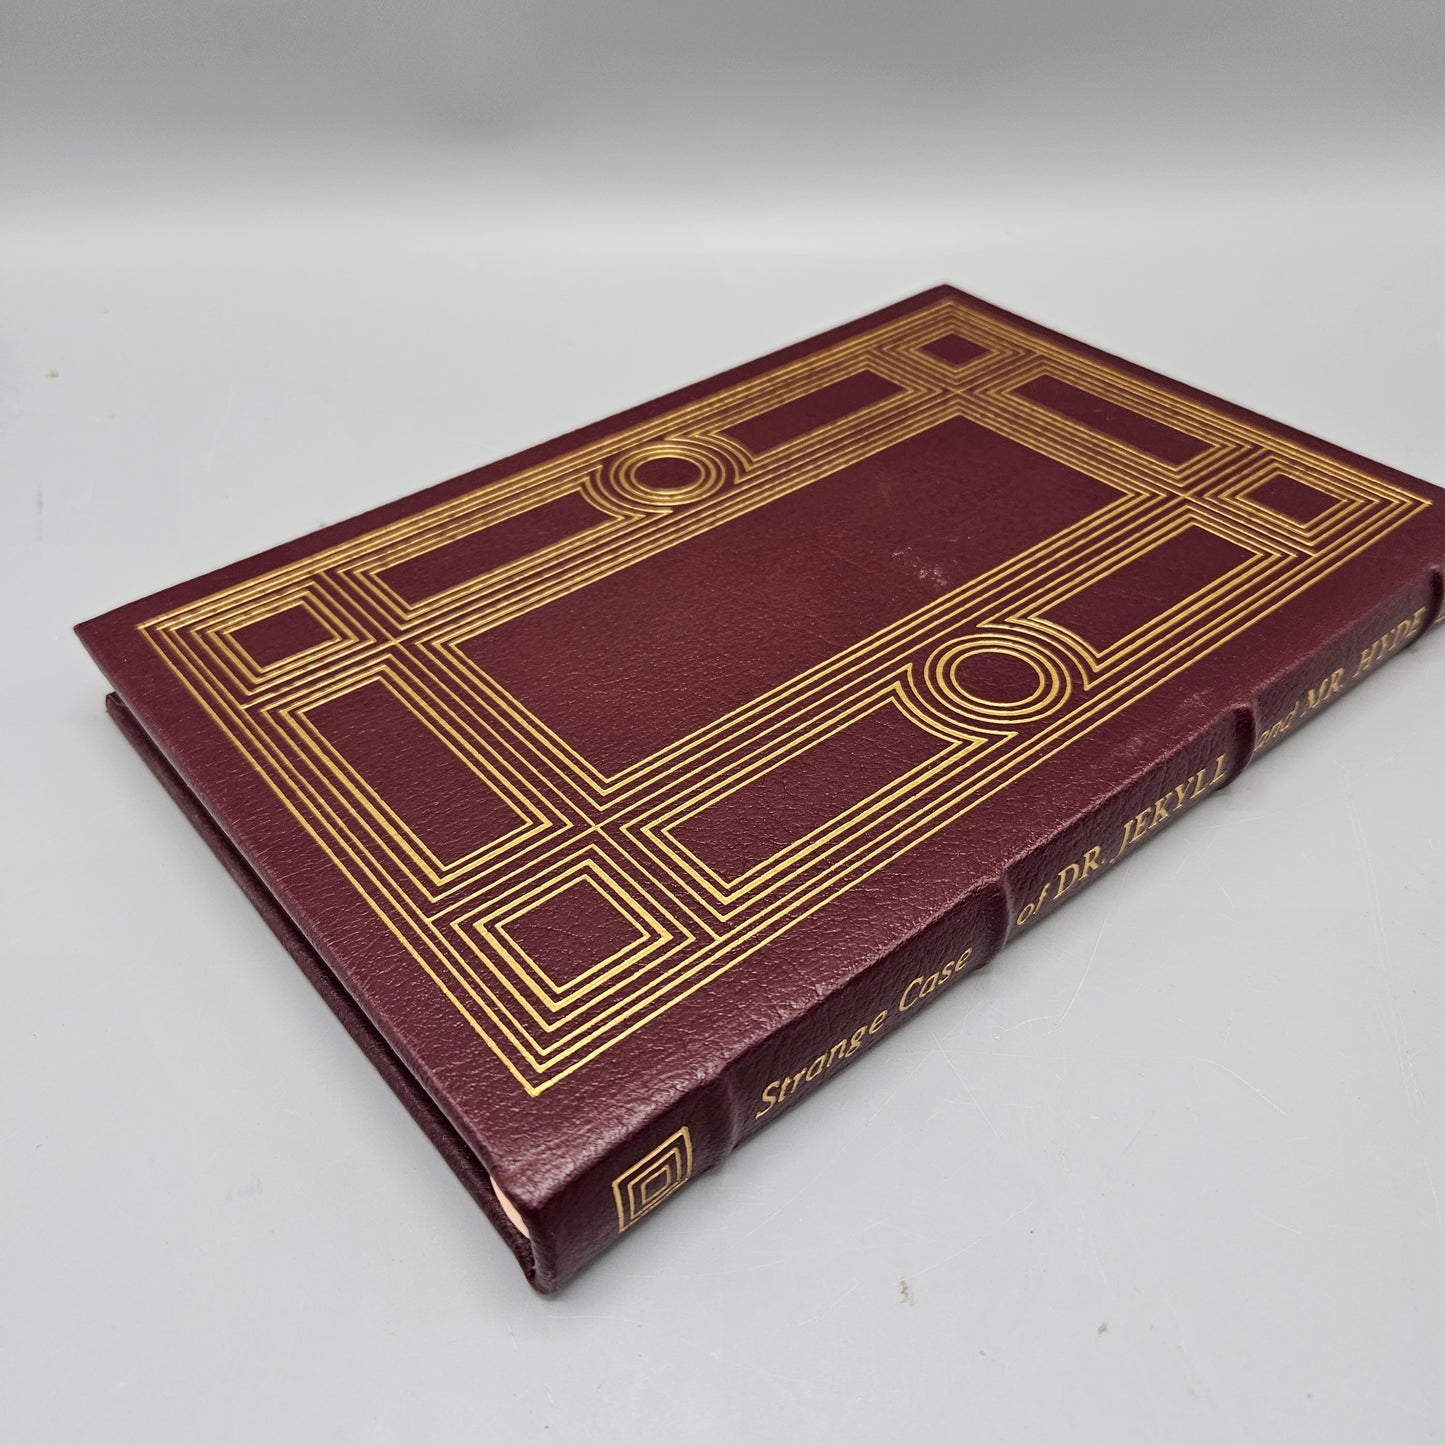 Leatherbound Book - Robert Louis Stevenson "Dr Jekyll and Mr Hyde" Easton Press